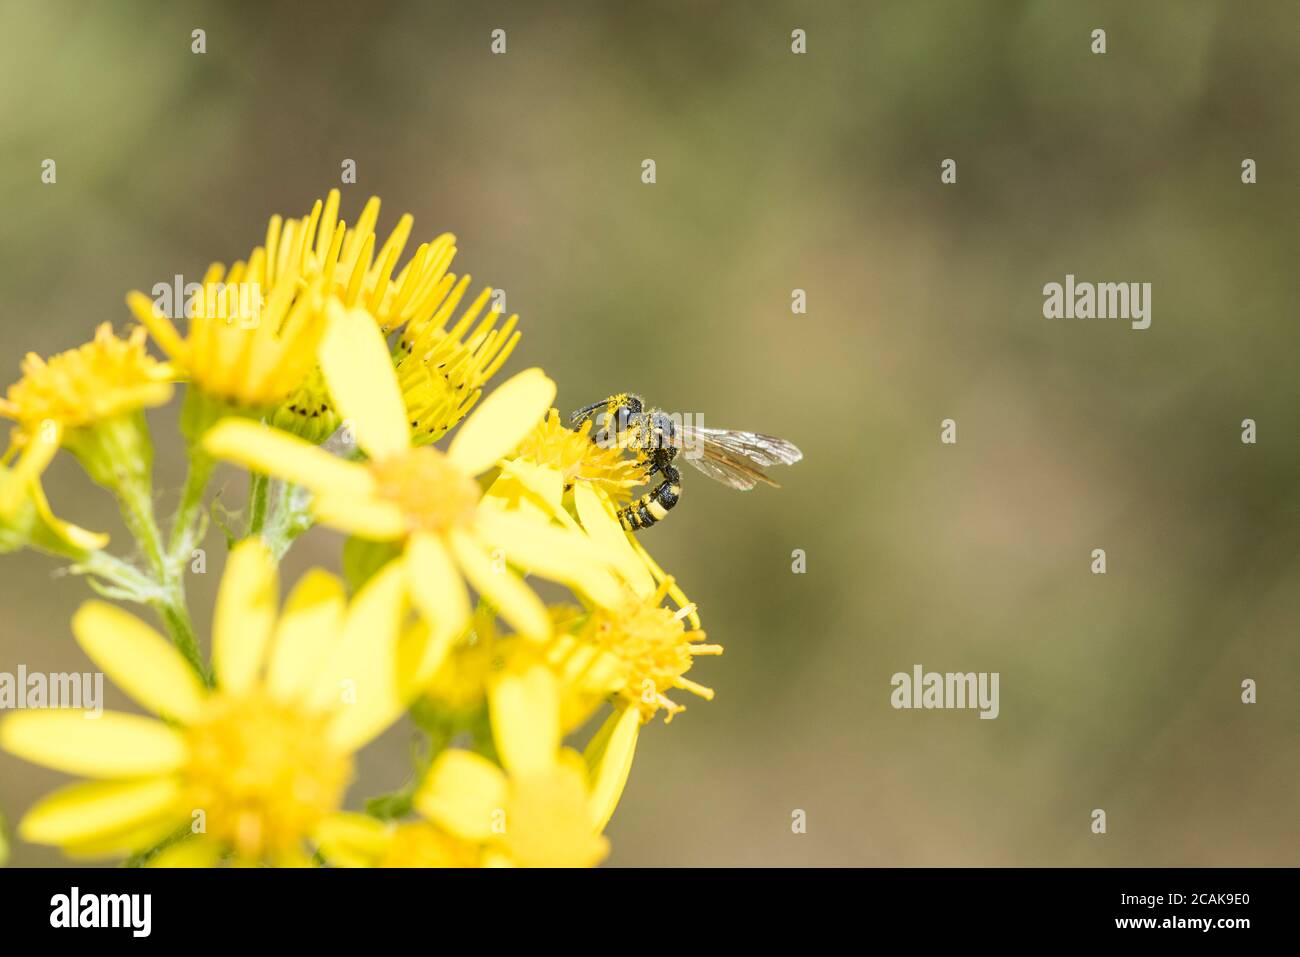 Side view of an Ornate Tailed Digger Wasp (Cerceris rybyensis) feeding on Ragwort Stock Photo